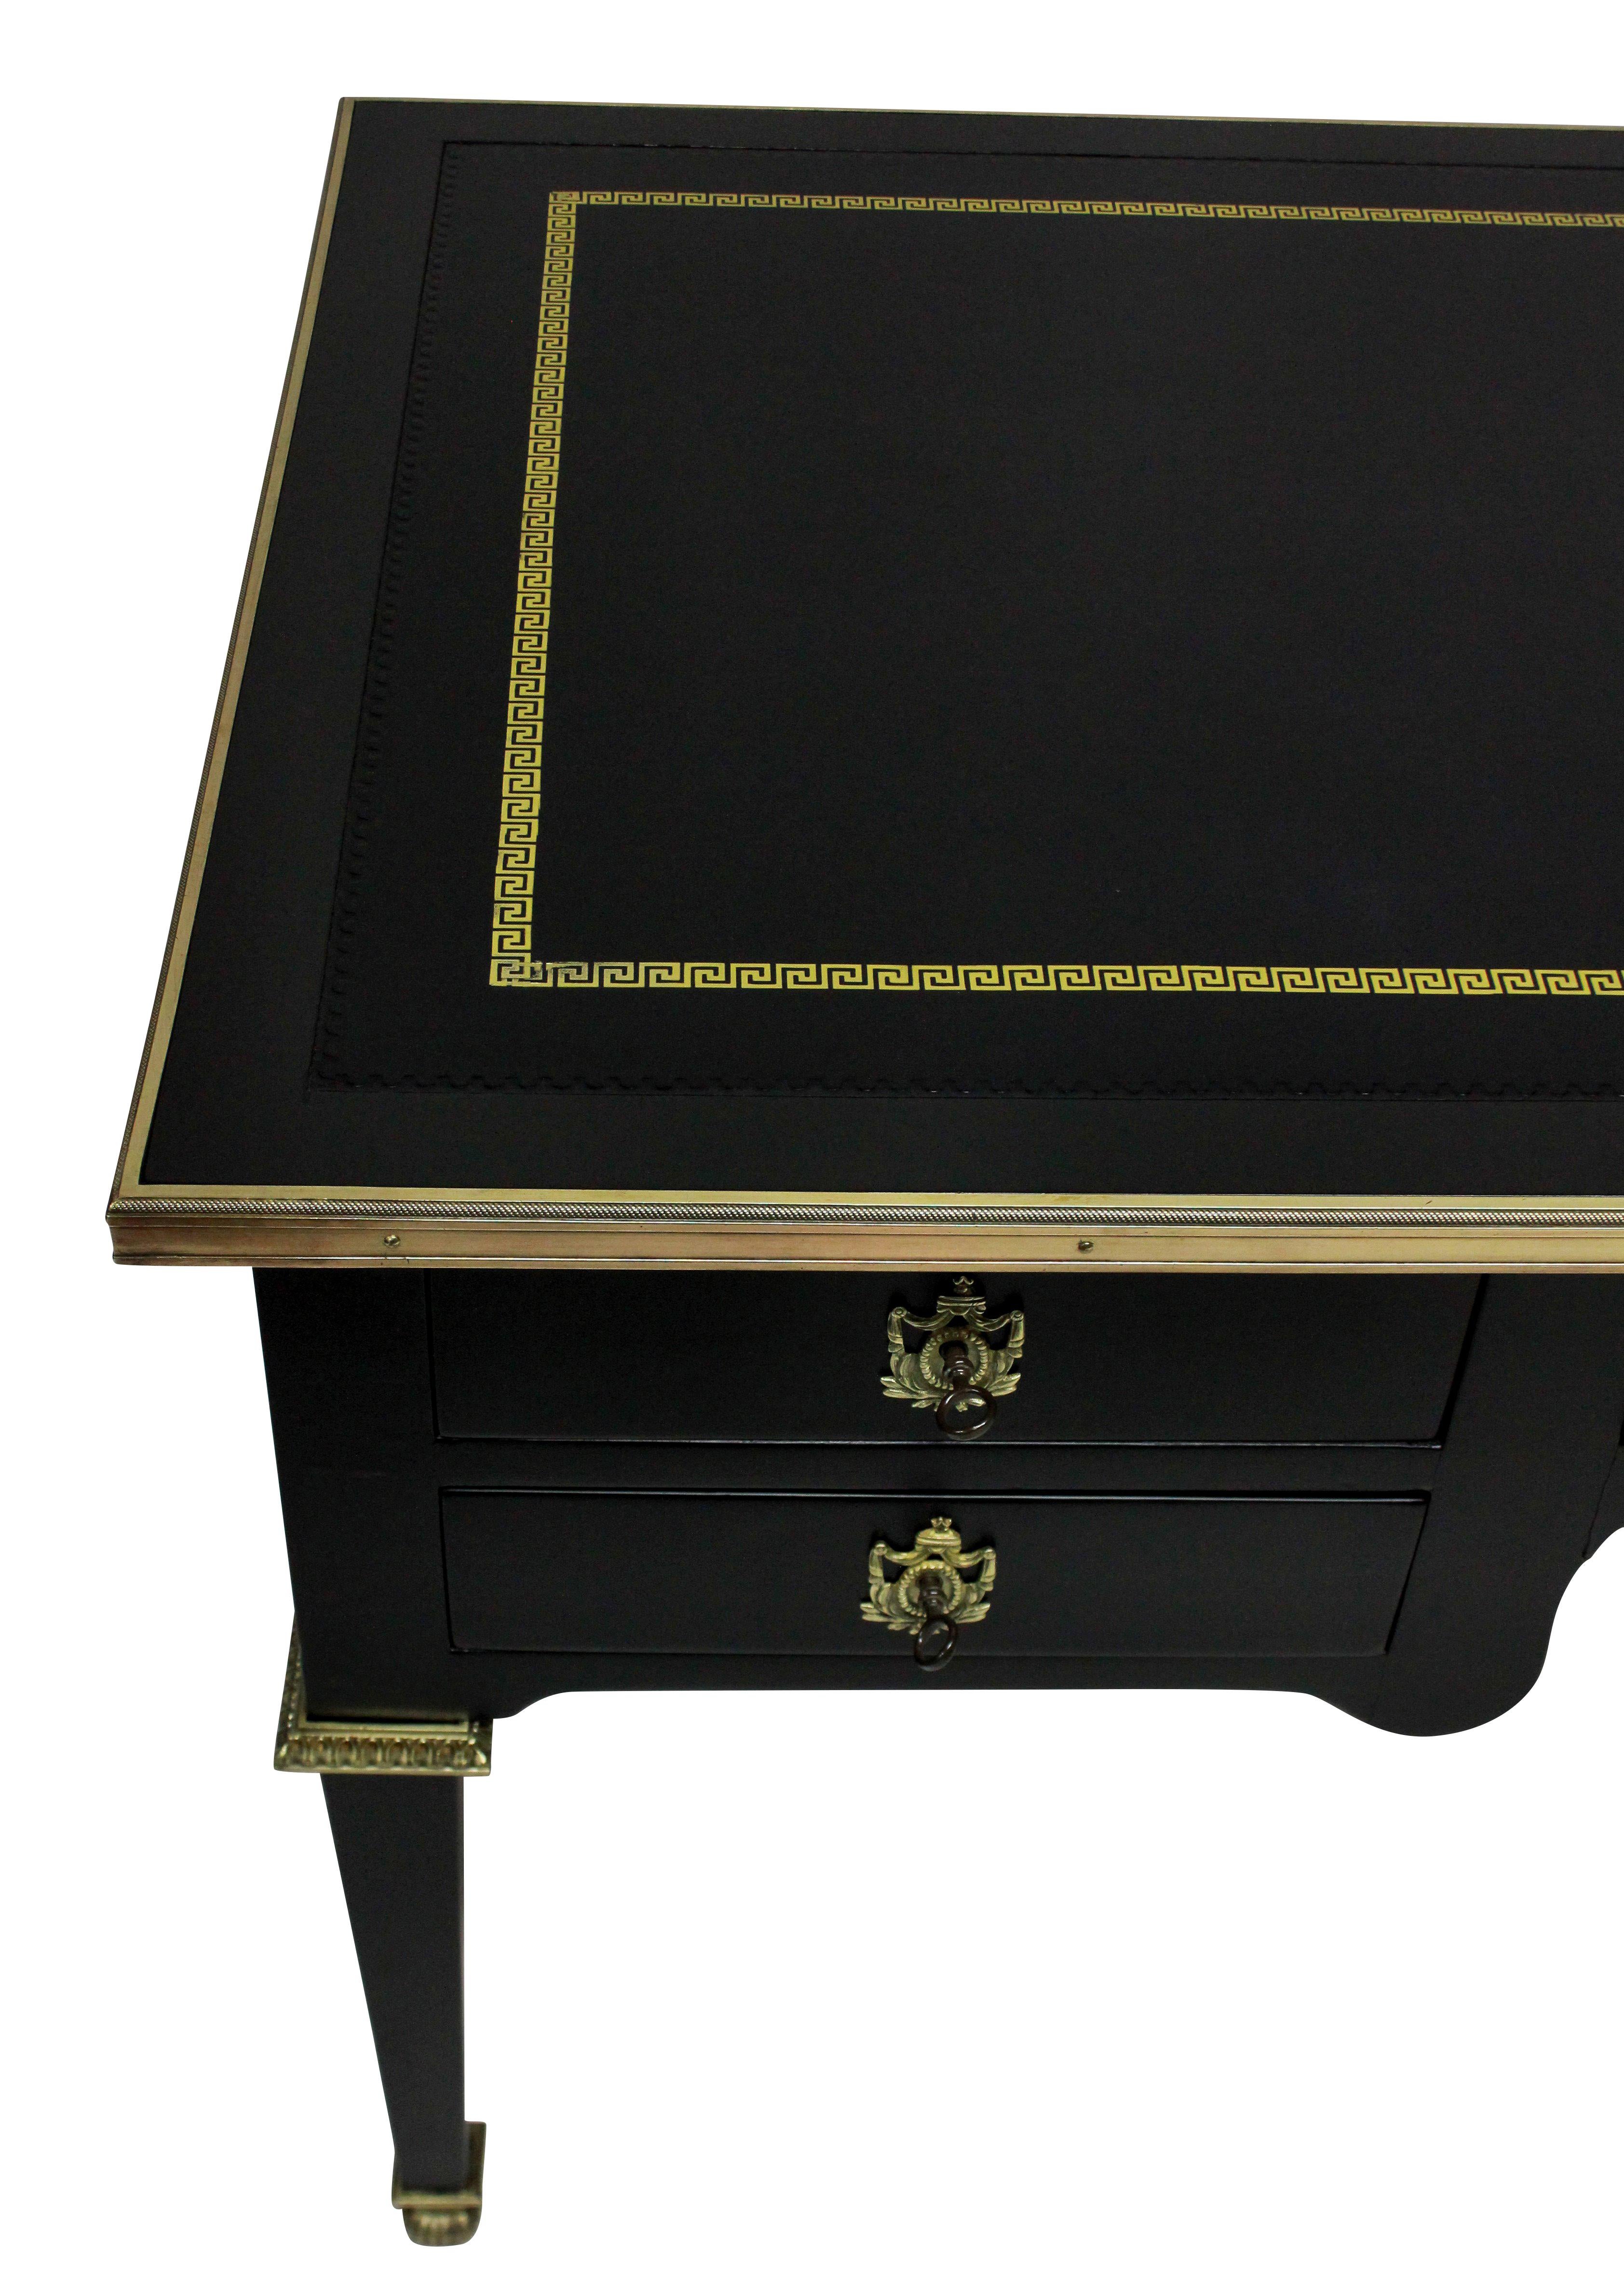 A fine French Louis XVI style desk in ebonized walnut, with a leather top with Greek key border. The gilt bronze mounts and escutcheons of good quality and each drawer have a separate key.
Measures: 57 cm high knee hole.
 